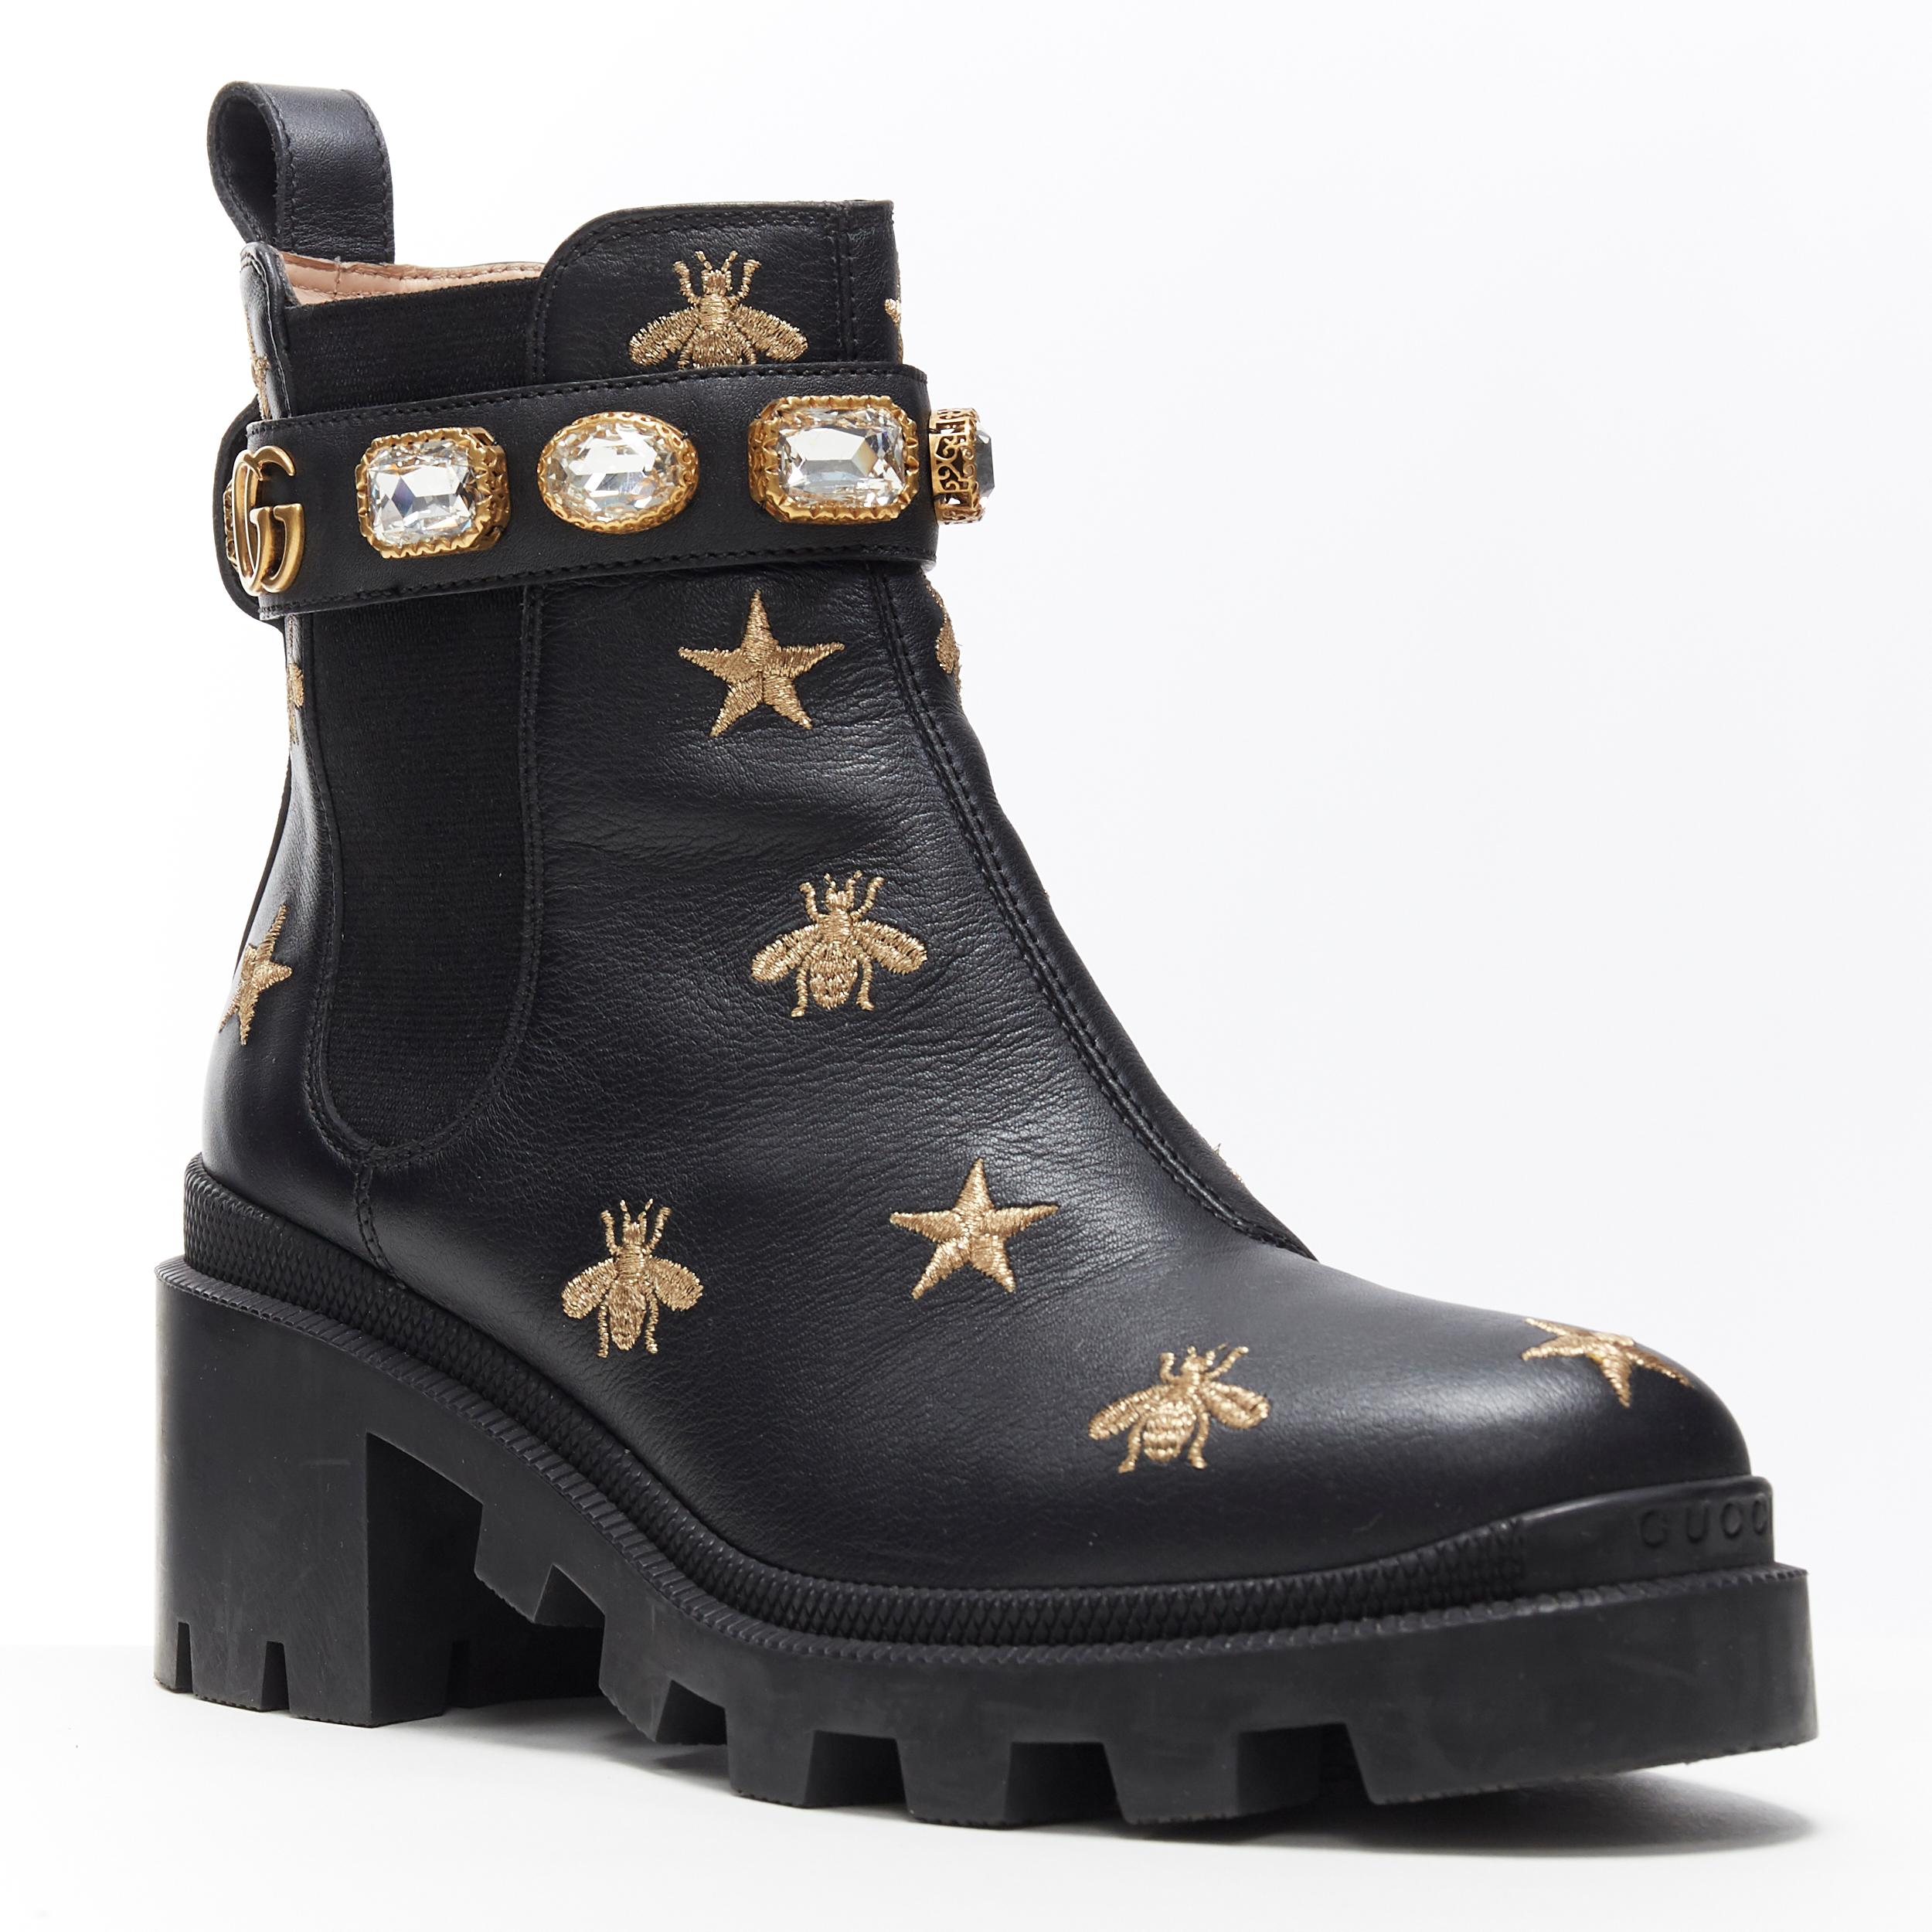 Kungfubasket Gucci Ankle Boot Black/Gold